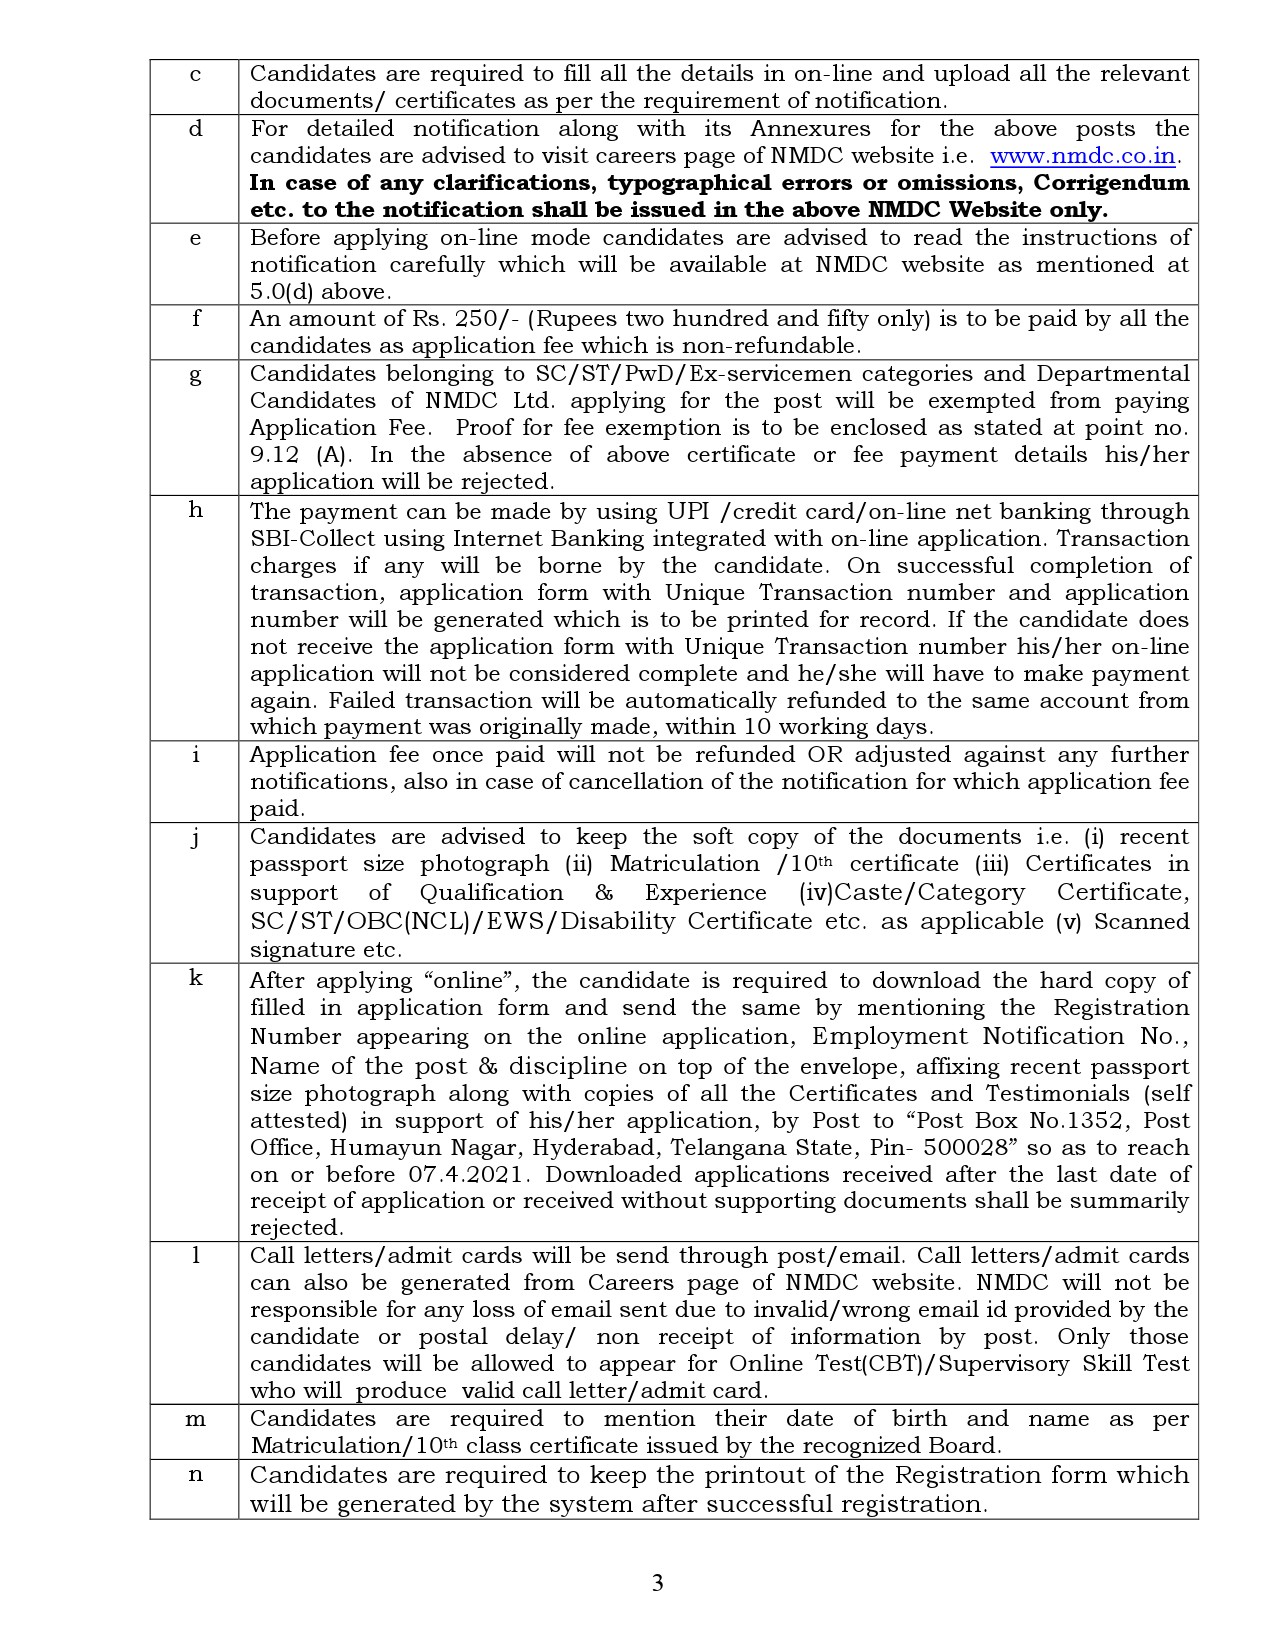 Junior Officer Trainee in NMDC Limited - Notification Image 3